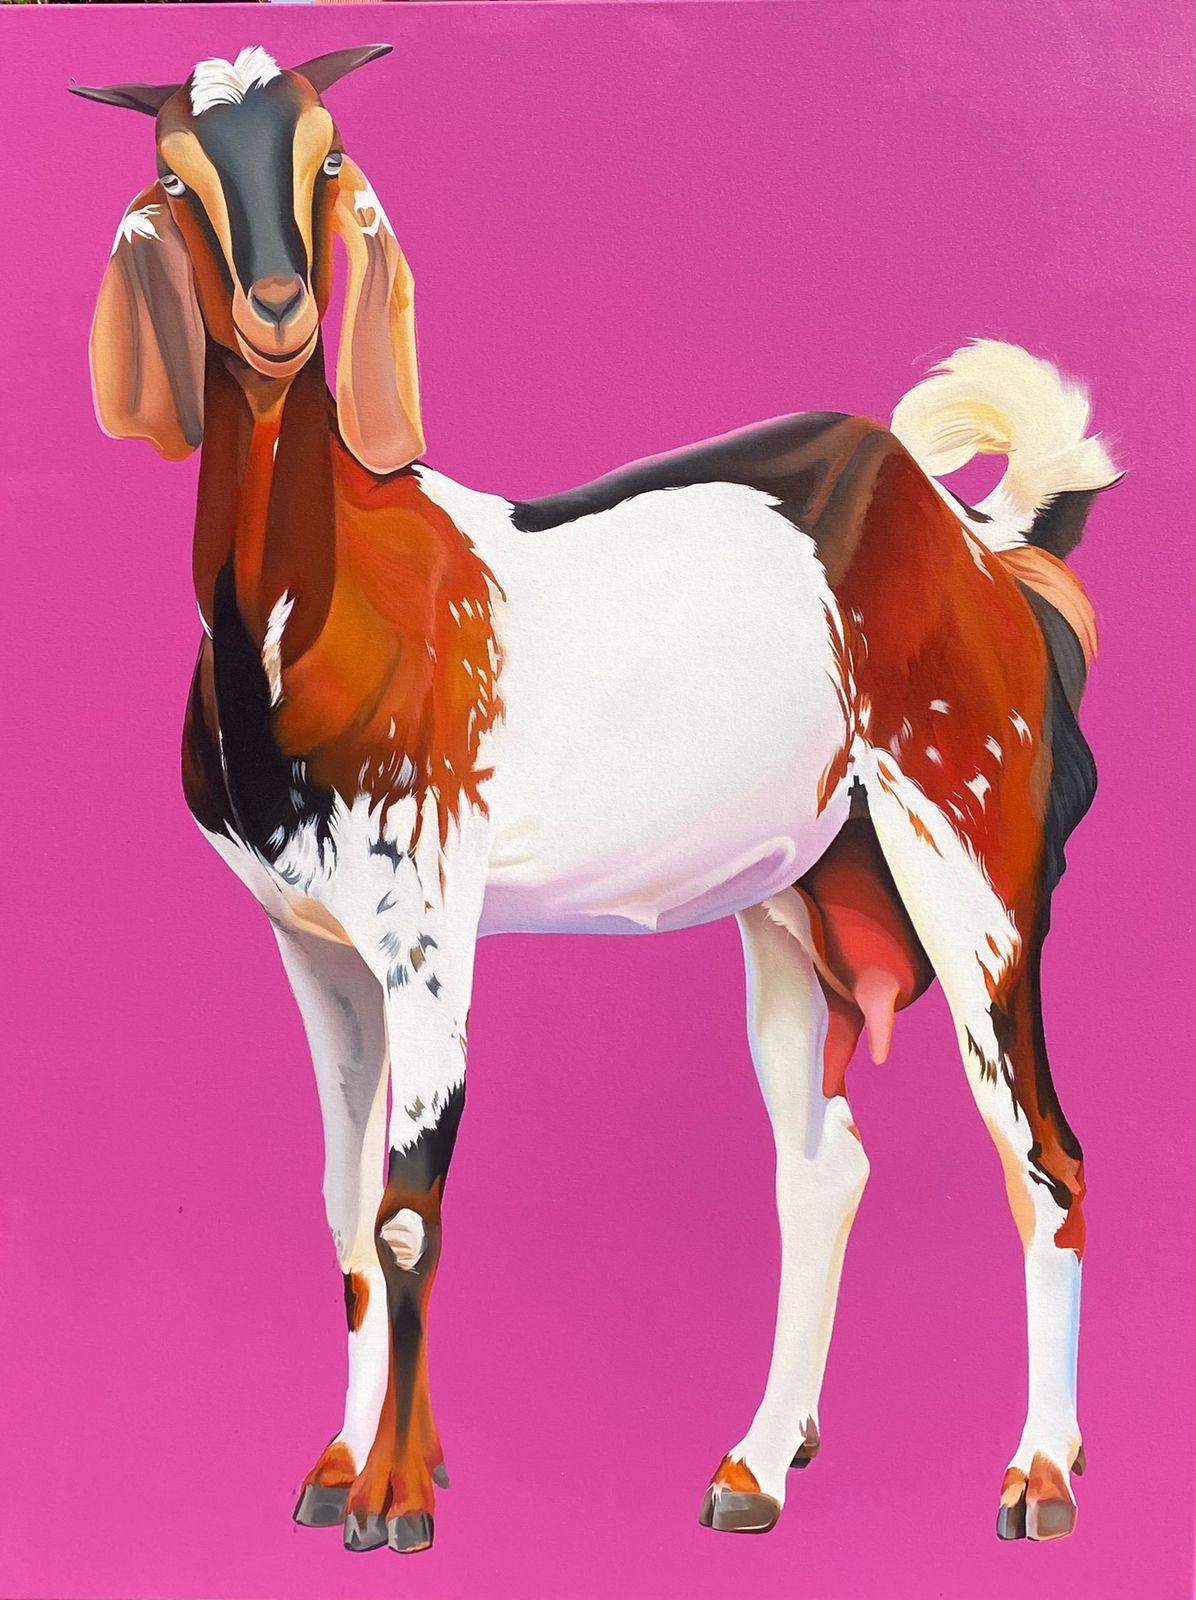 Feroz Khan - The Goat, Animal, Pink, Brown, White Colour, Oil and Acrylic  on Canvas 